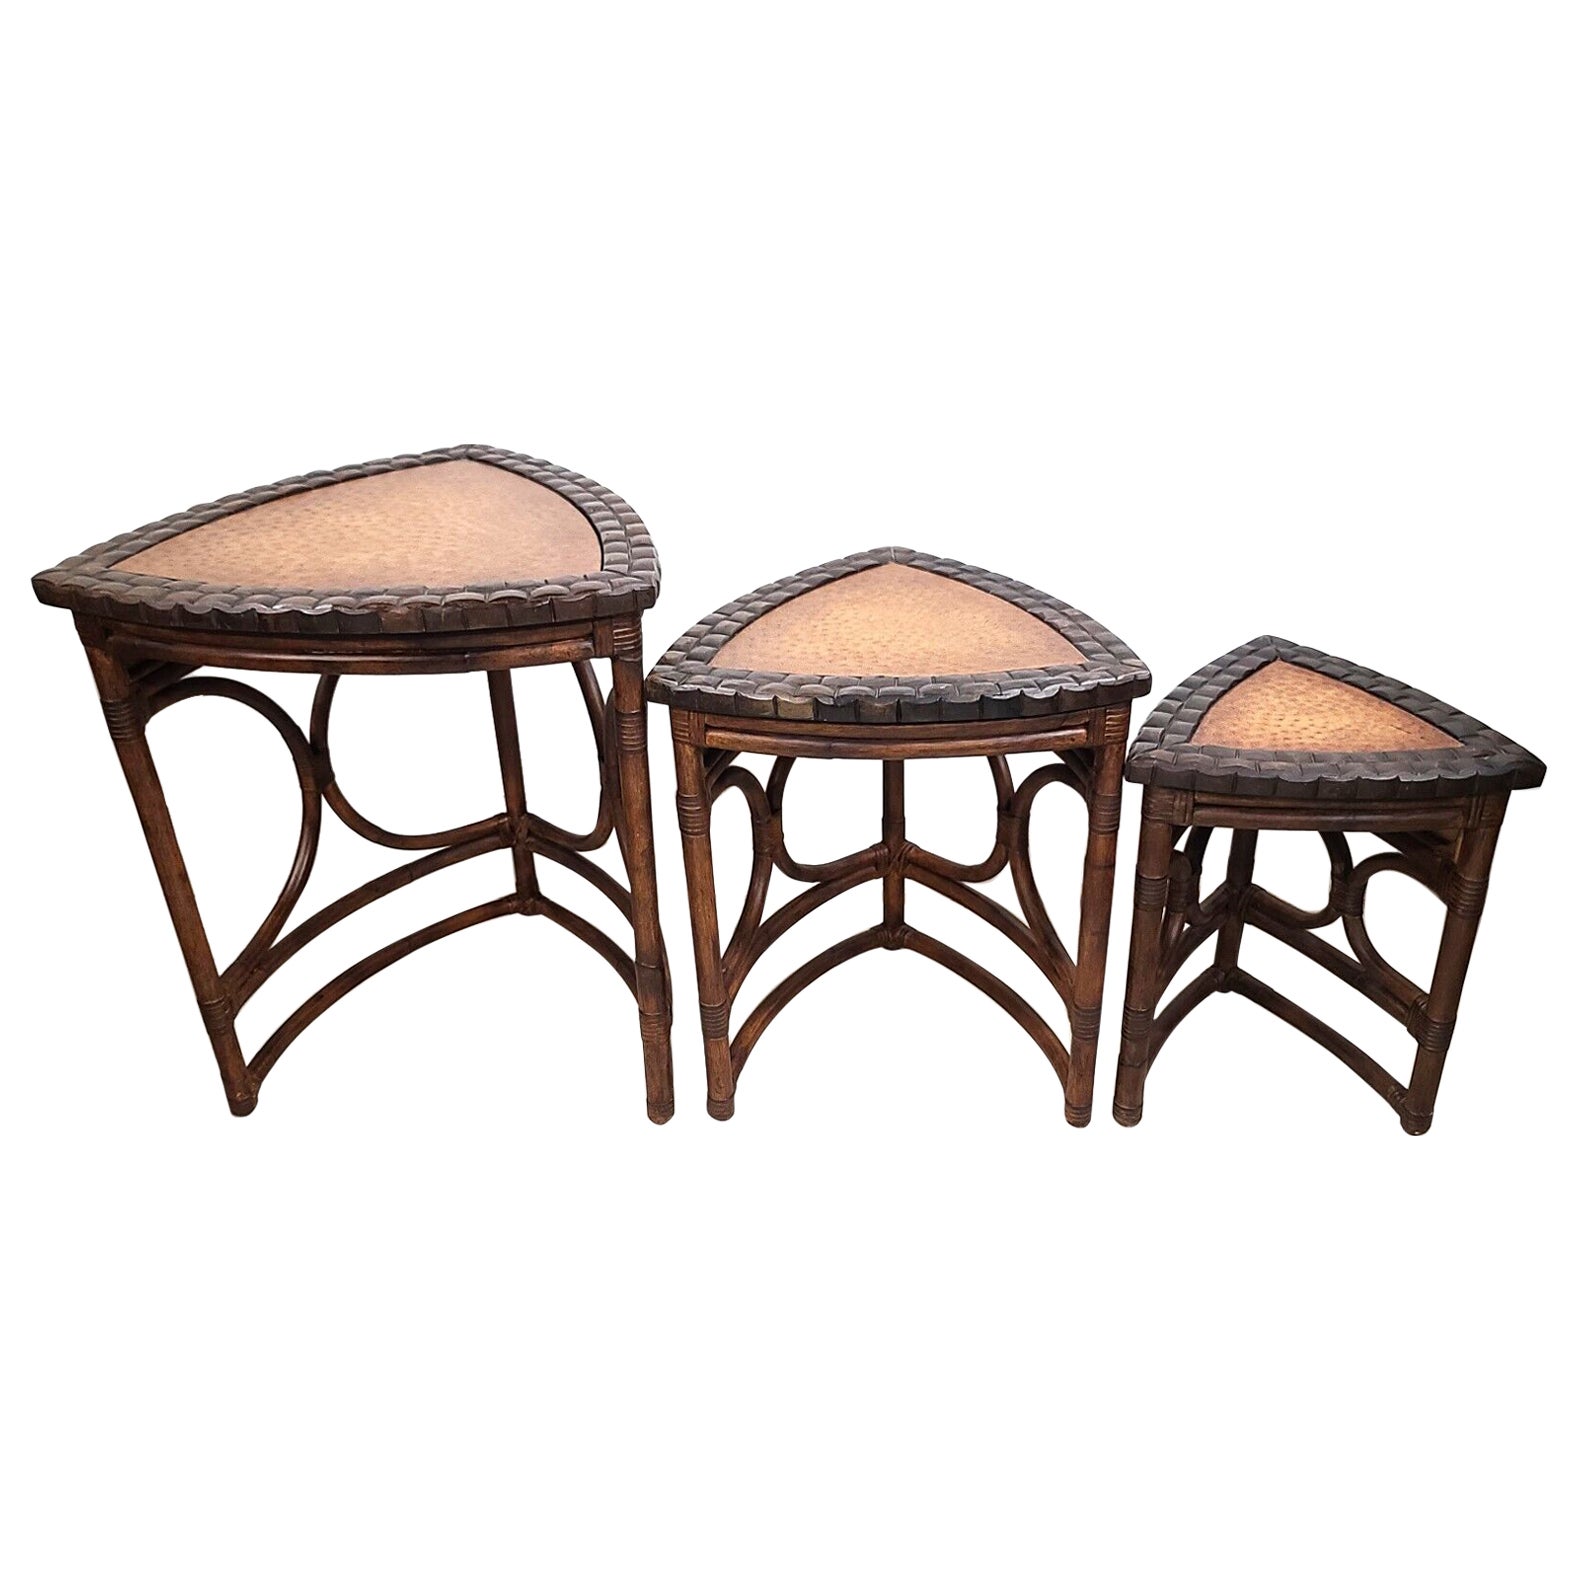 Vintage Bamboo Rattan Coconut Shell Ostrich Nesting Tables, Set of 3 For Sale